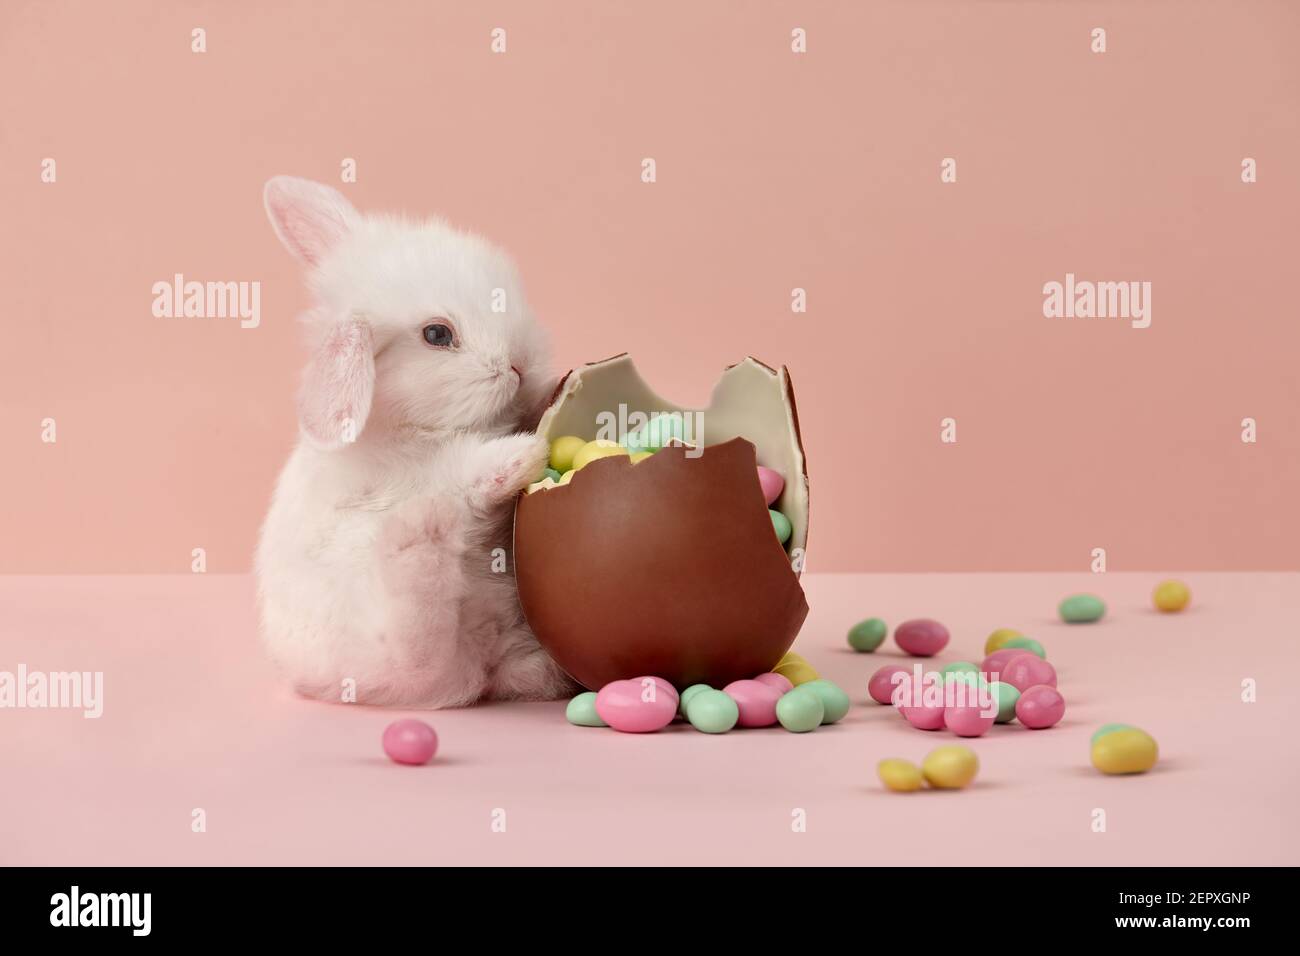 Cute white Easter bunny rabbit with chocolate egg and colorful sweets on pink background Stock Photo